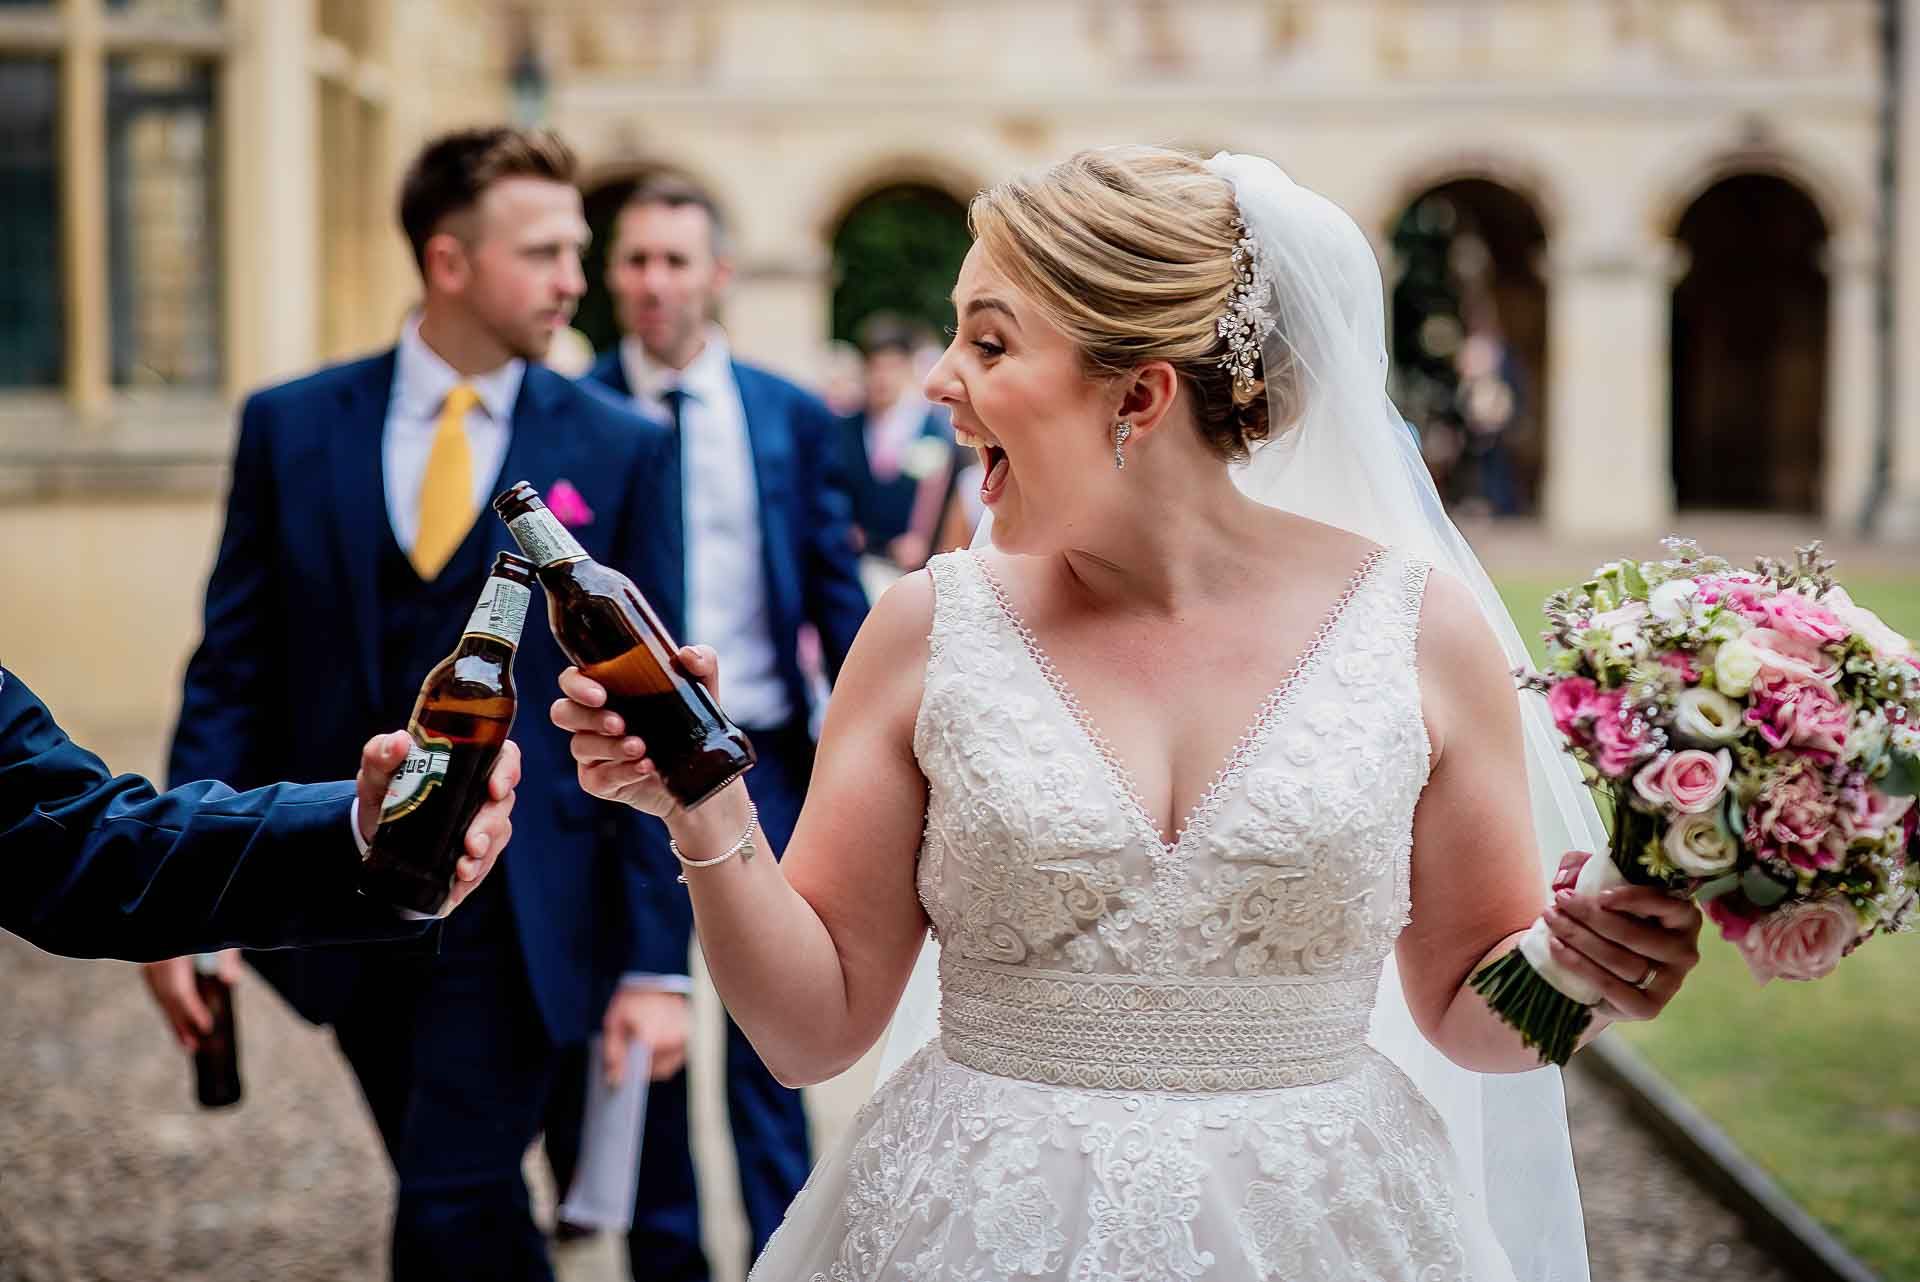 Leah celebrating by clinking her beer bottle with her new husband's and the biggest smile! Photo thanks to Damien Vickers Photography.